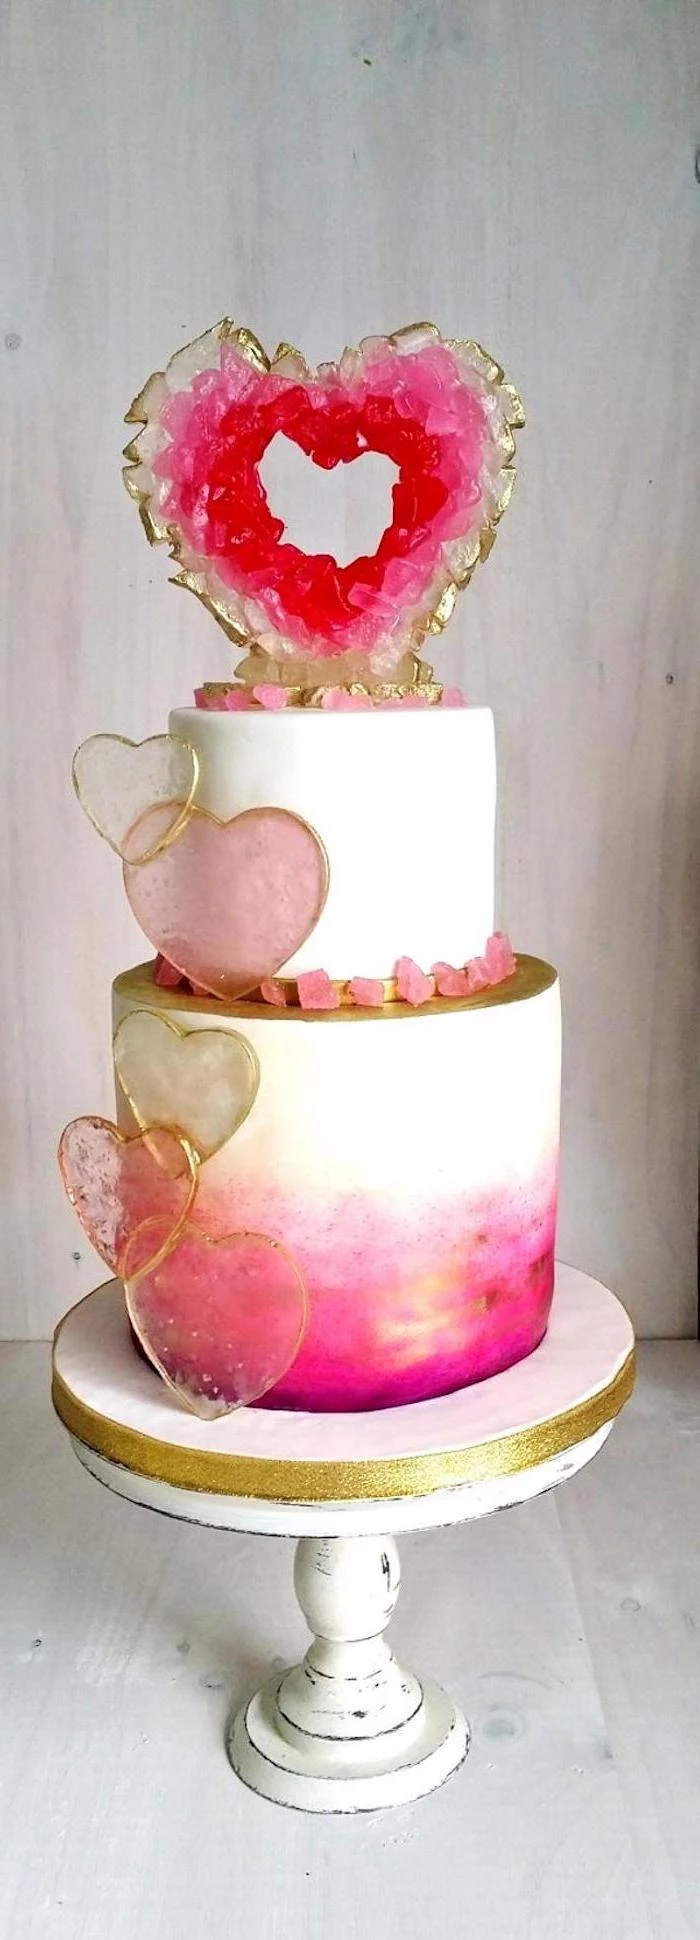 geode cake recipe, two tier cake, covered with pink and white fondant, decorated with pink heart shaped rock candy